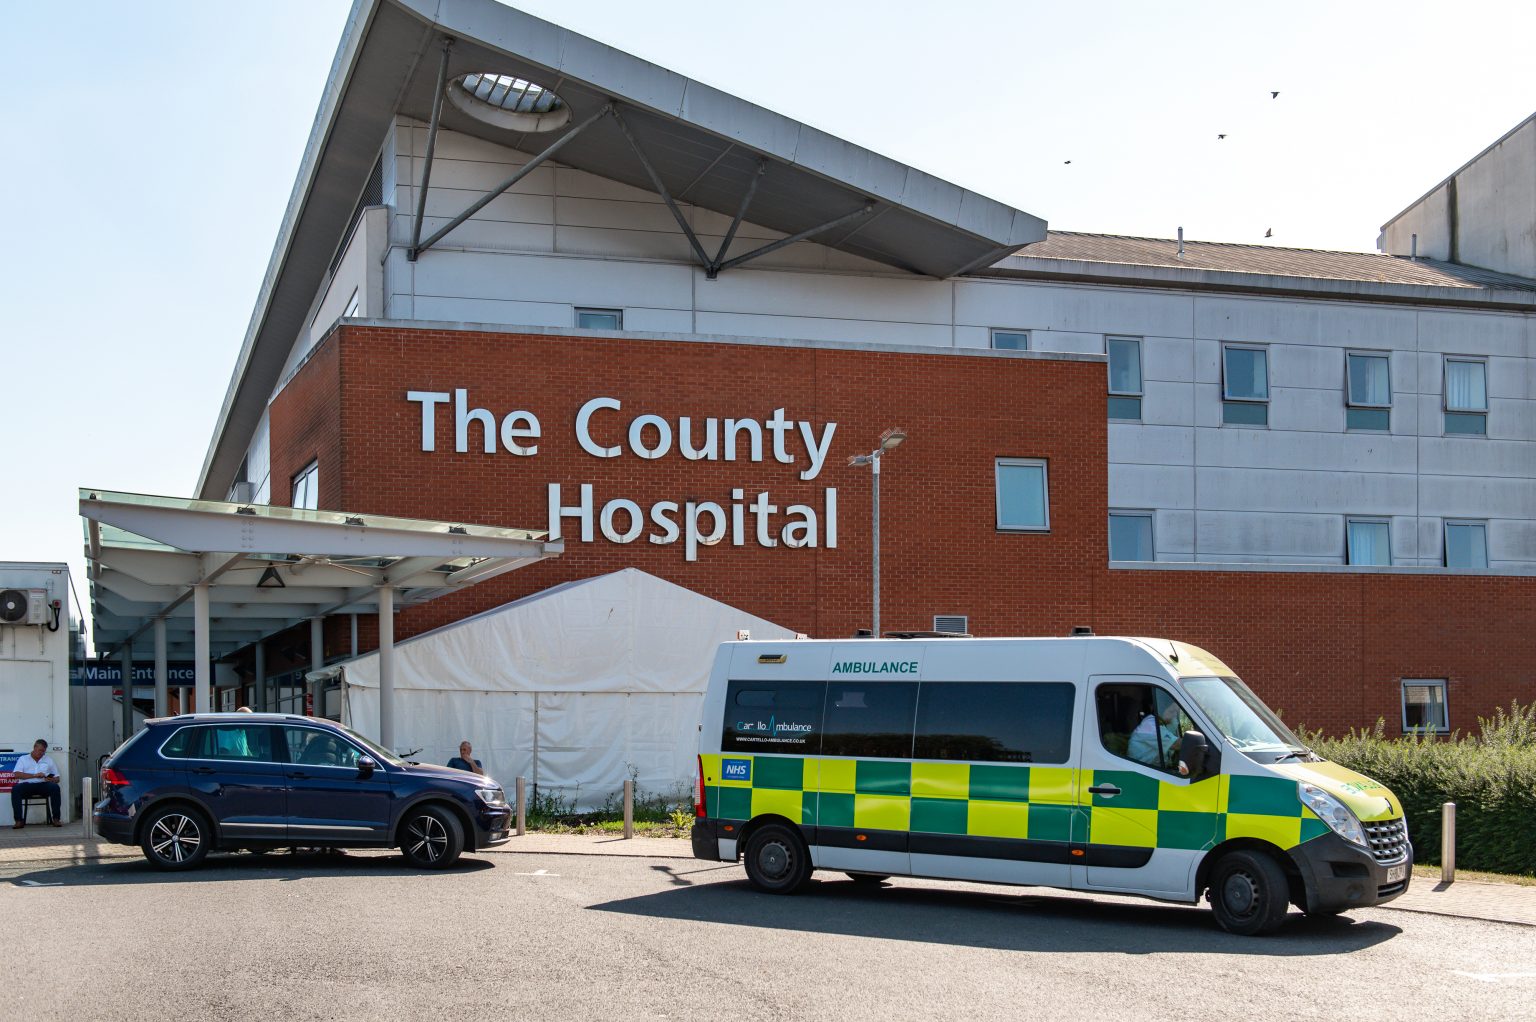 NEWS | Visiting restrictions eased further at Wye Valley NHS Trust hospitals in Herefordshire